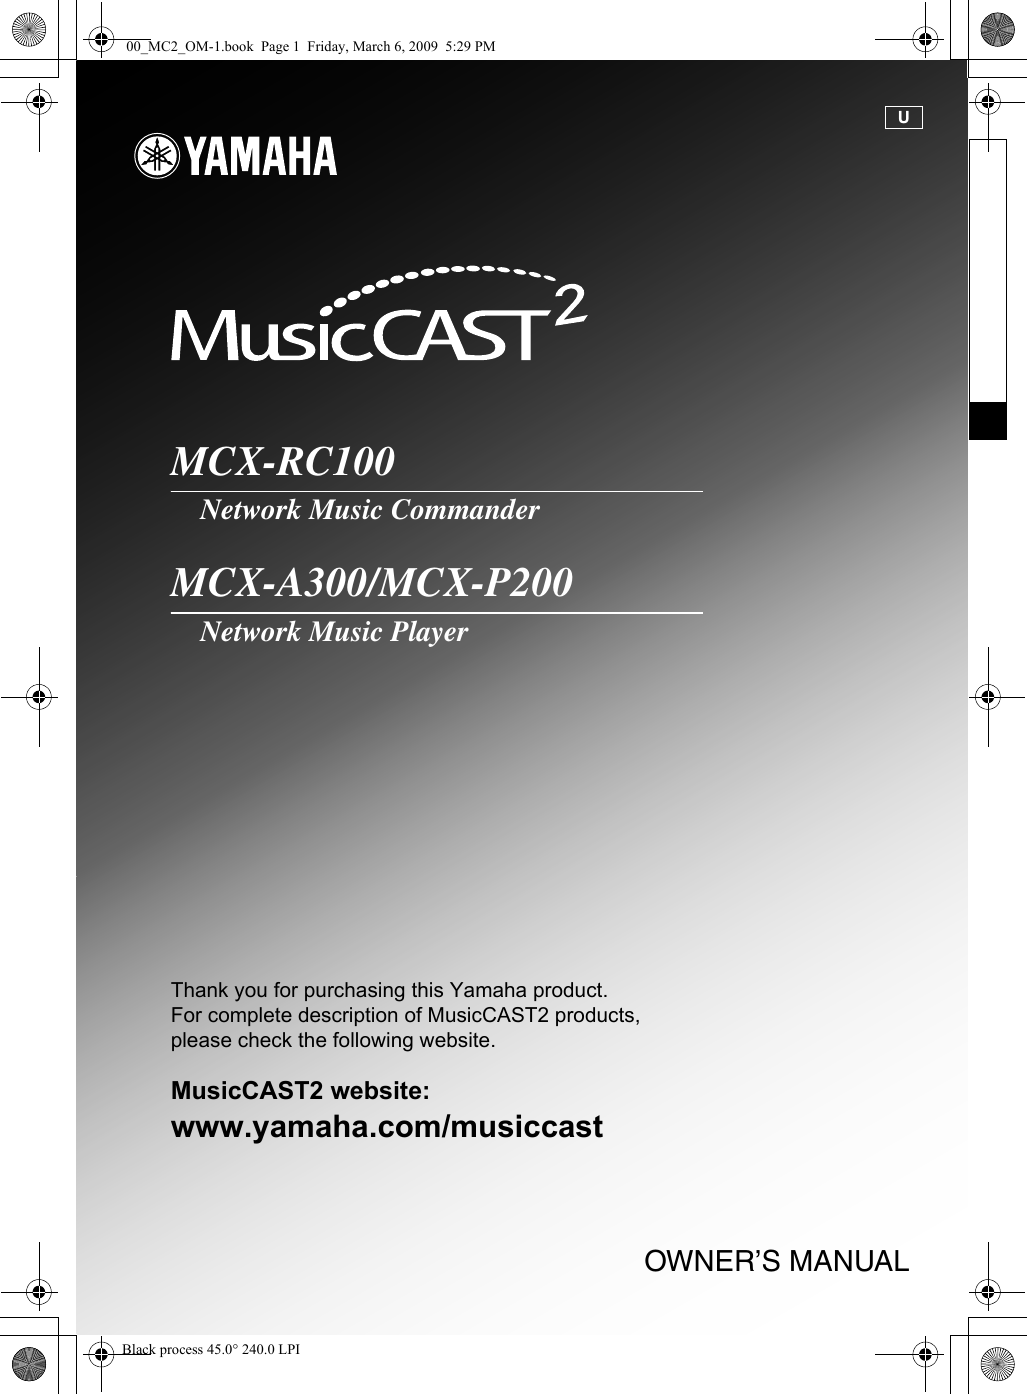 MCX-RC100Network Music CommanderMCX-A300/MCX-P200Network Music PlayerOWNER’S MANUALThank you for purchasing this Yamaha product.For complete description of MusicCAST2 products, please check the following website.MusicCAST2 website:www.yamaha.com/musiccastU00_MC2_OM-1.book  Page 1  Friday, March 6, 2009  5:29 PMBlack process 45.0° 240.0 LPI 